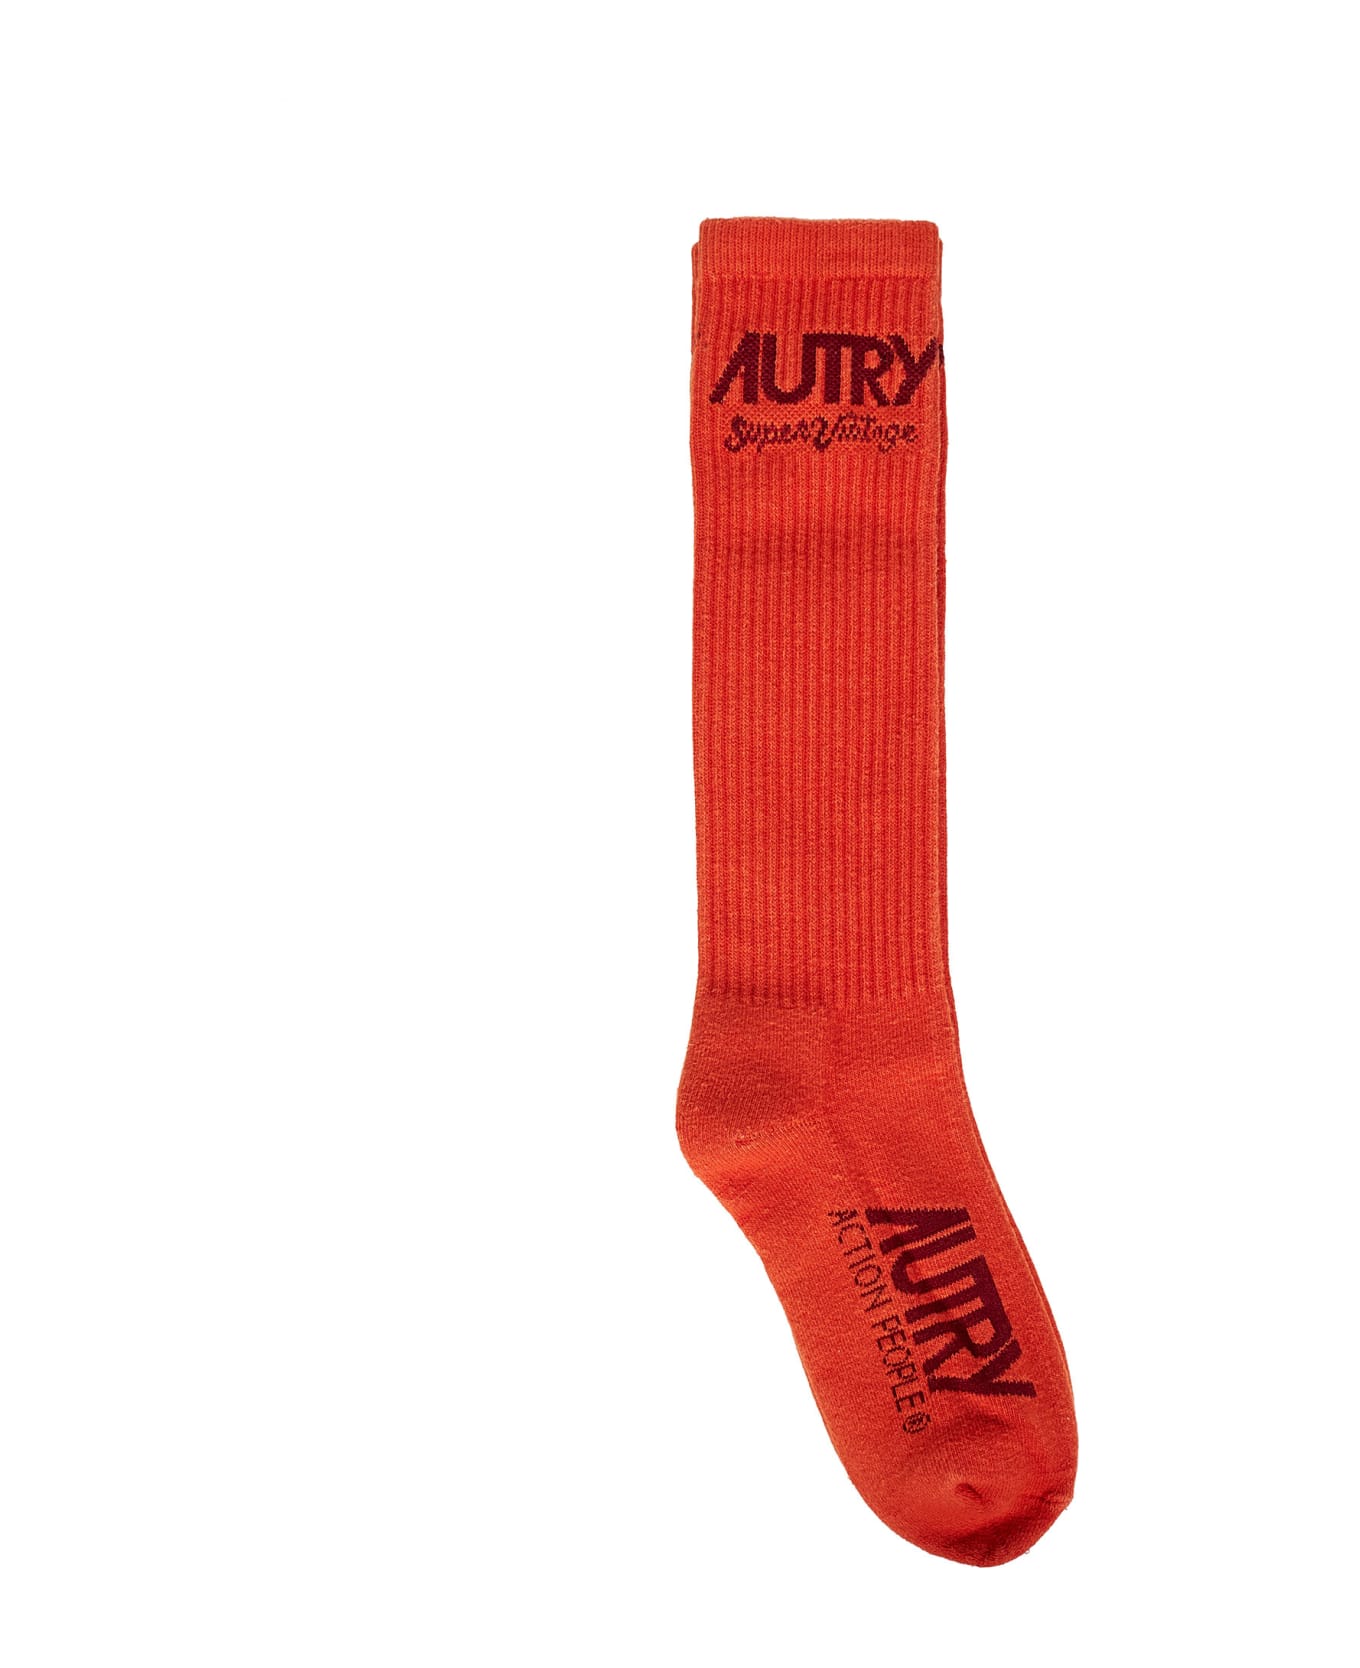 Autry Supervintage Socks - Tinto orng 靴下